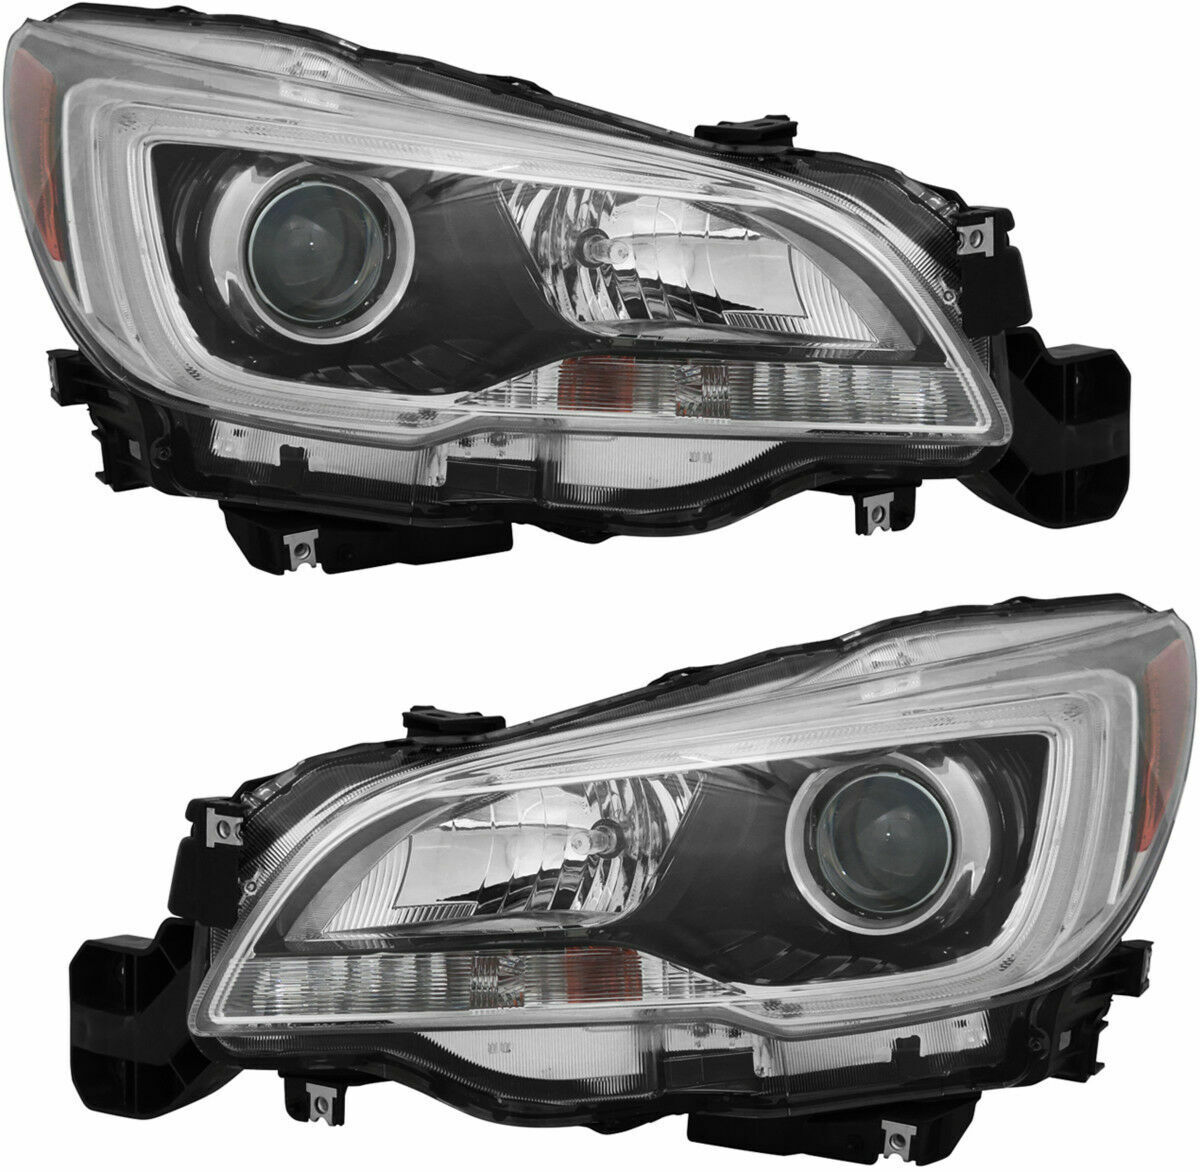 FITS FOR LEGACY / OUTBACK 2015 2016 2017 HEADLIGHT HALOGEN BLACK RIGHT & LEFT 